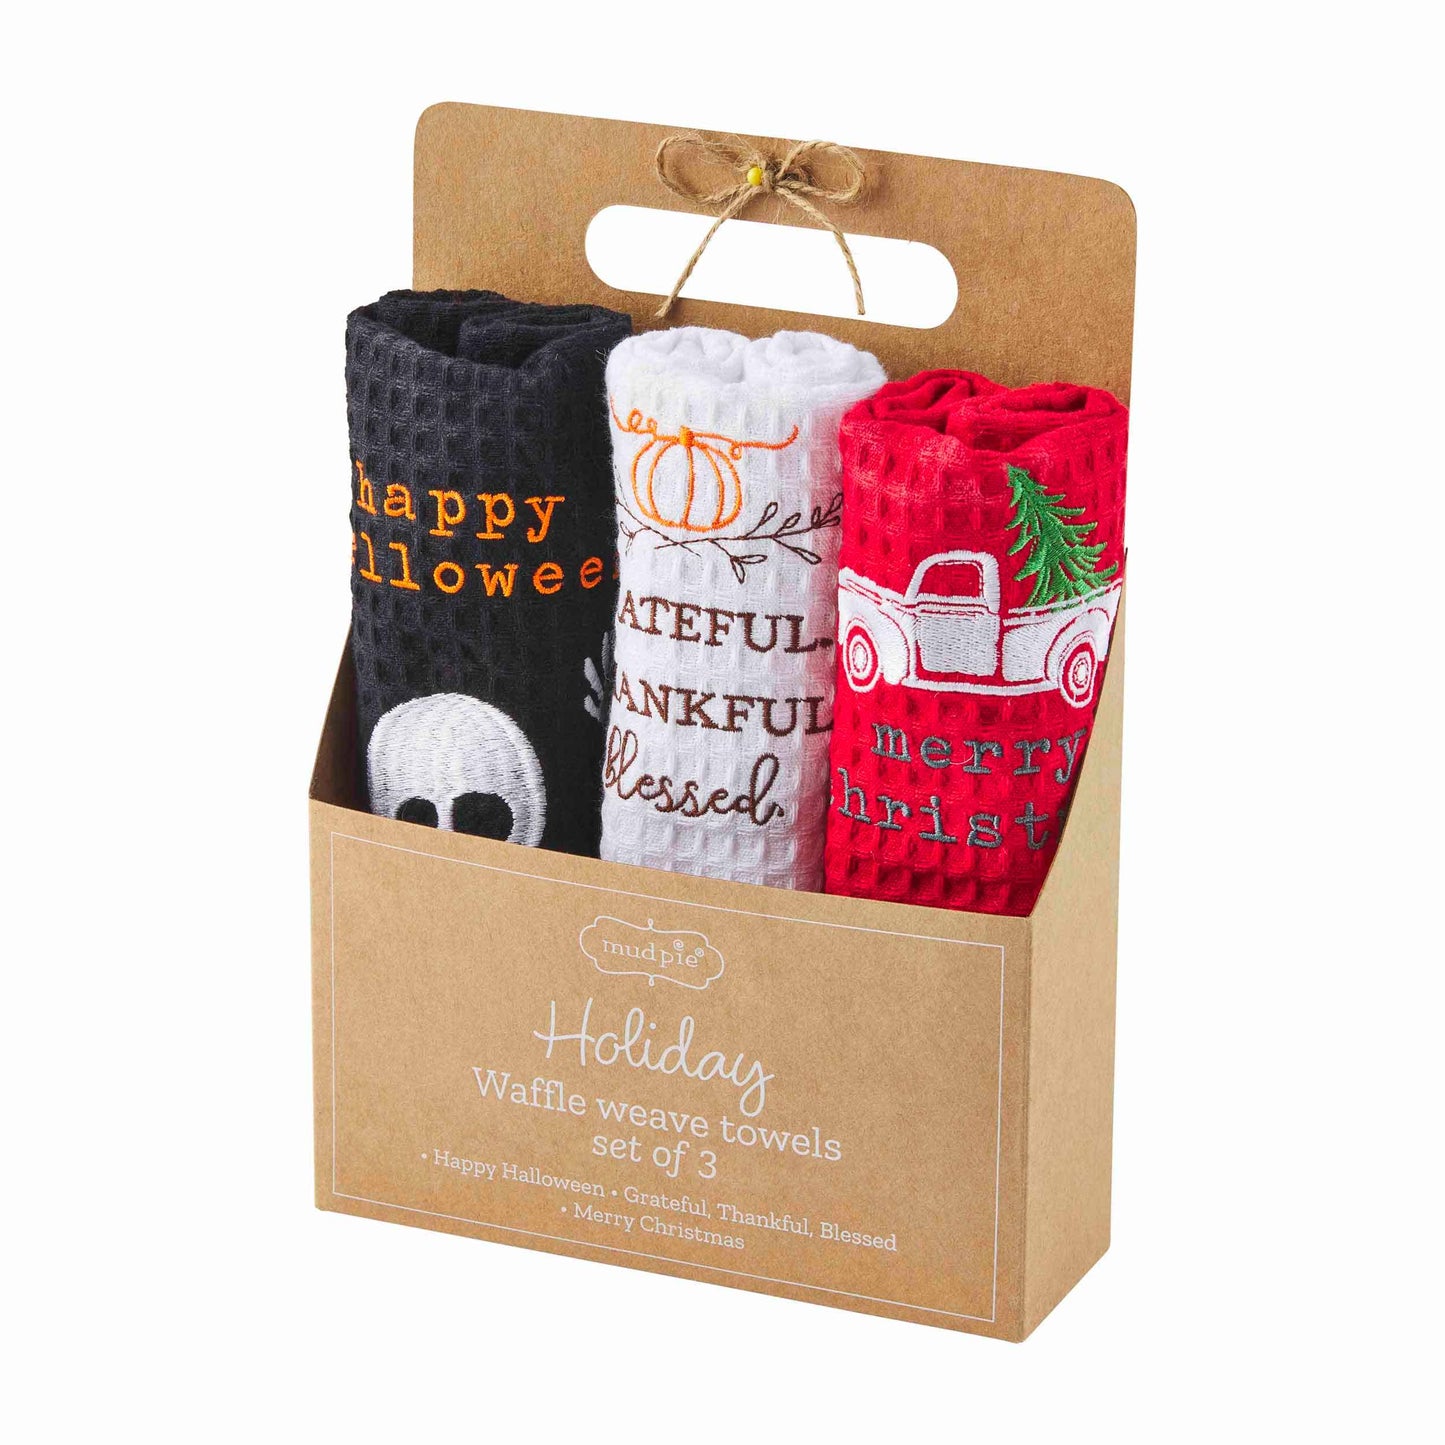 Holiday Waffle Weave Towels set of 3